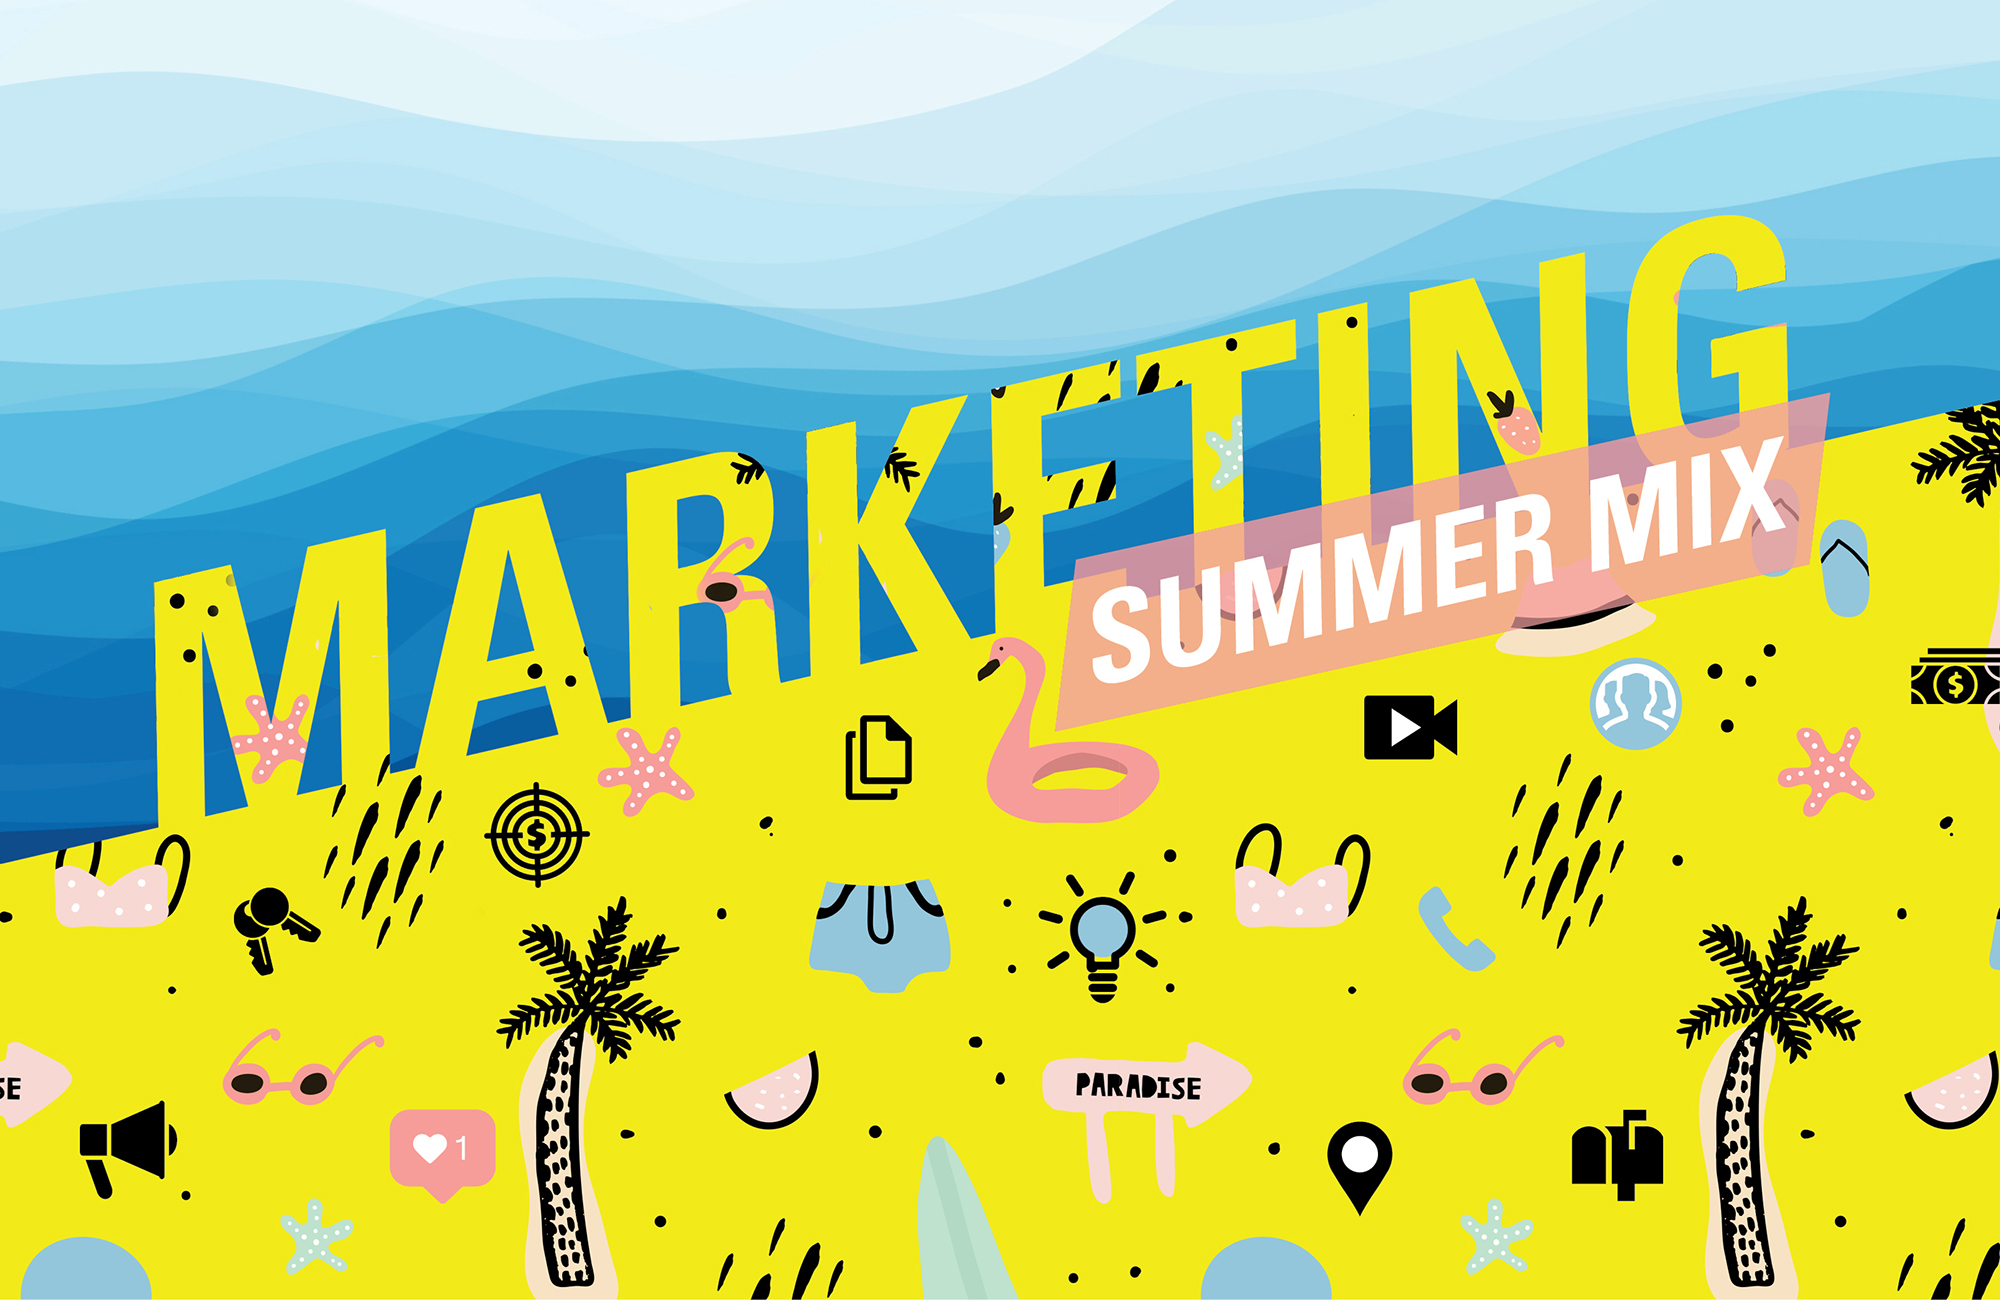 Mix Up Your Marketing this Summer